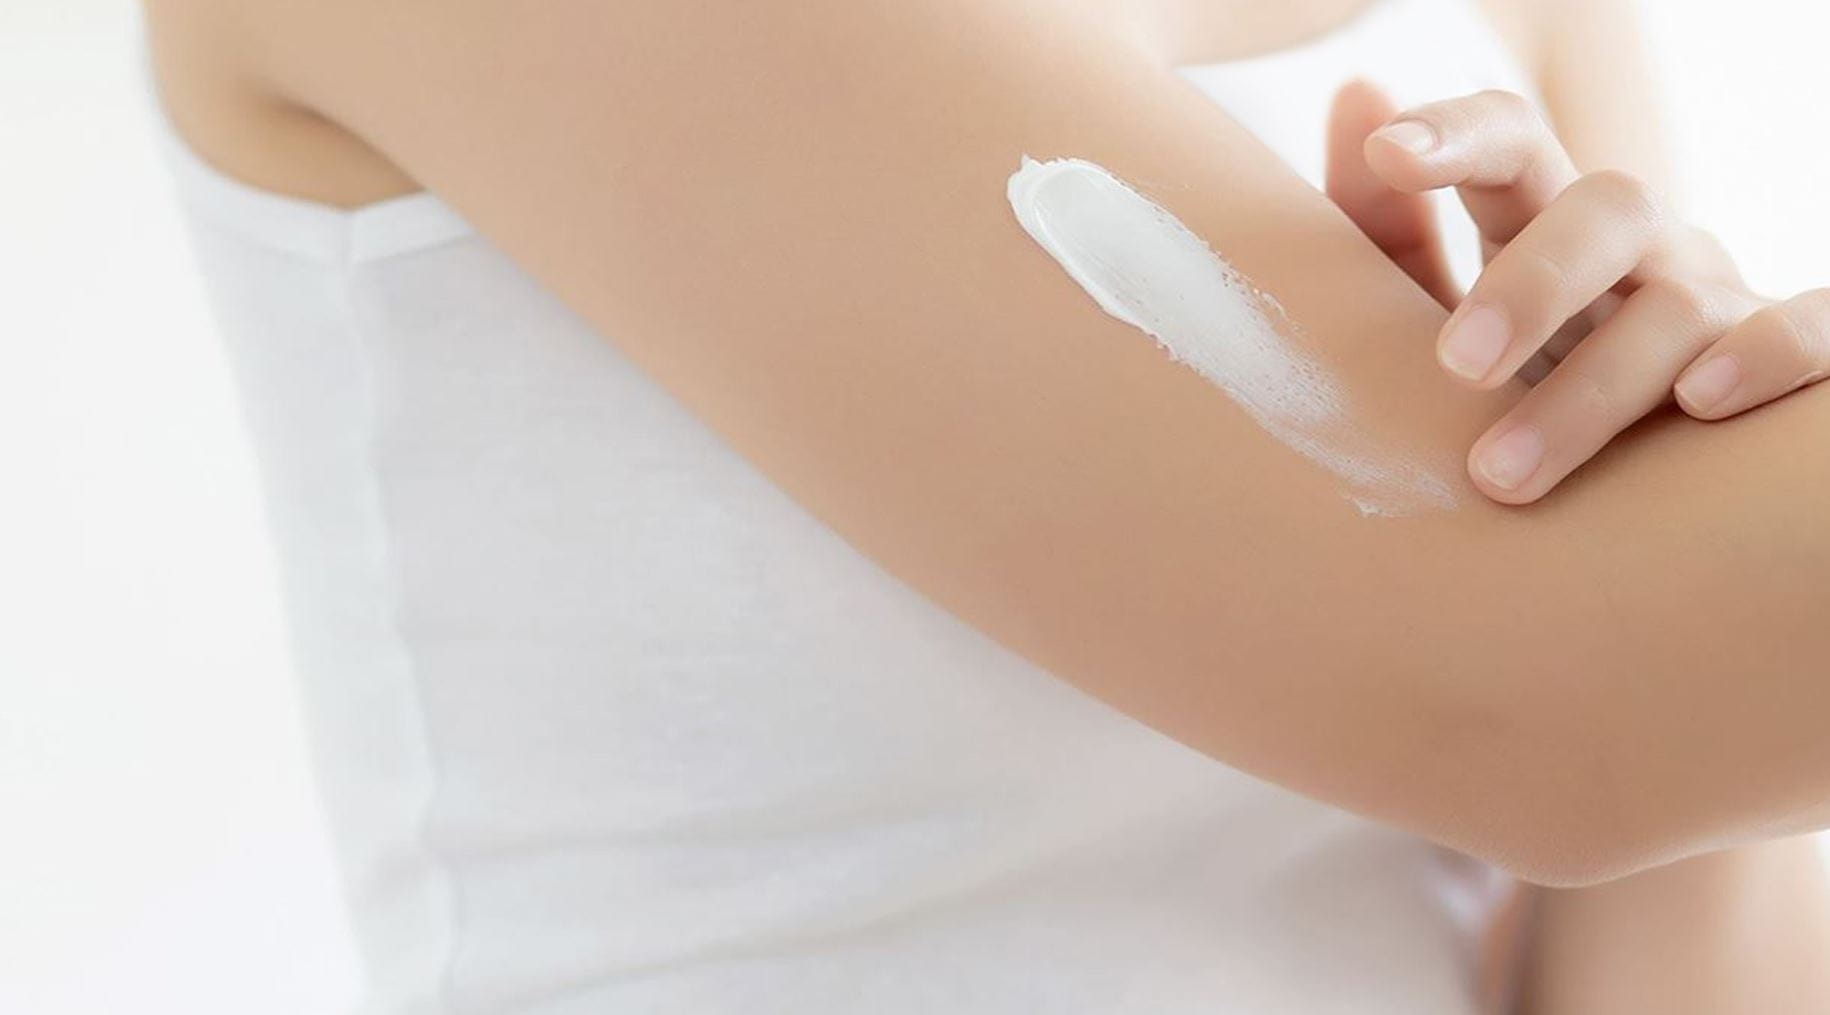 How to Moisturize Your Skin in Very Dry Areas?